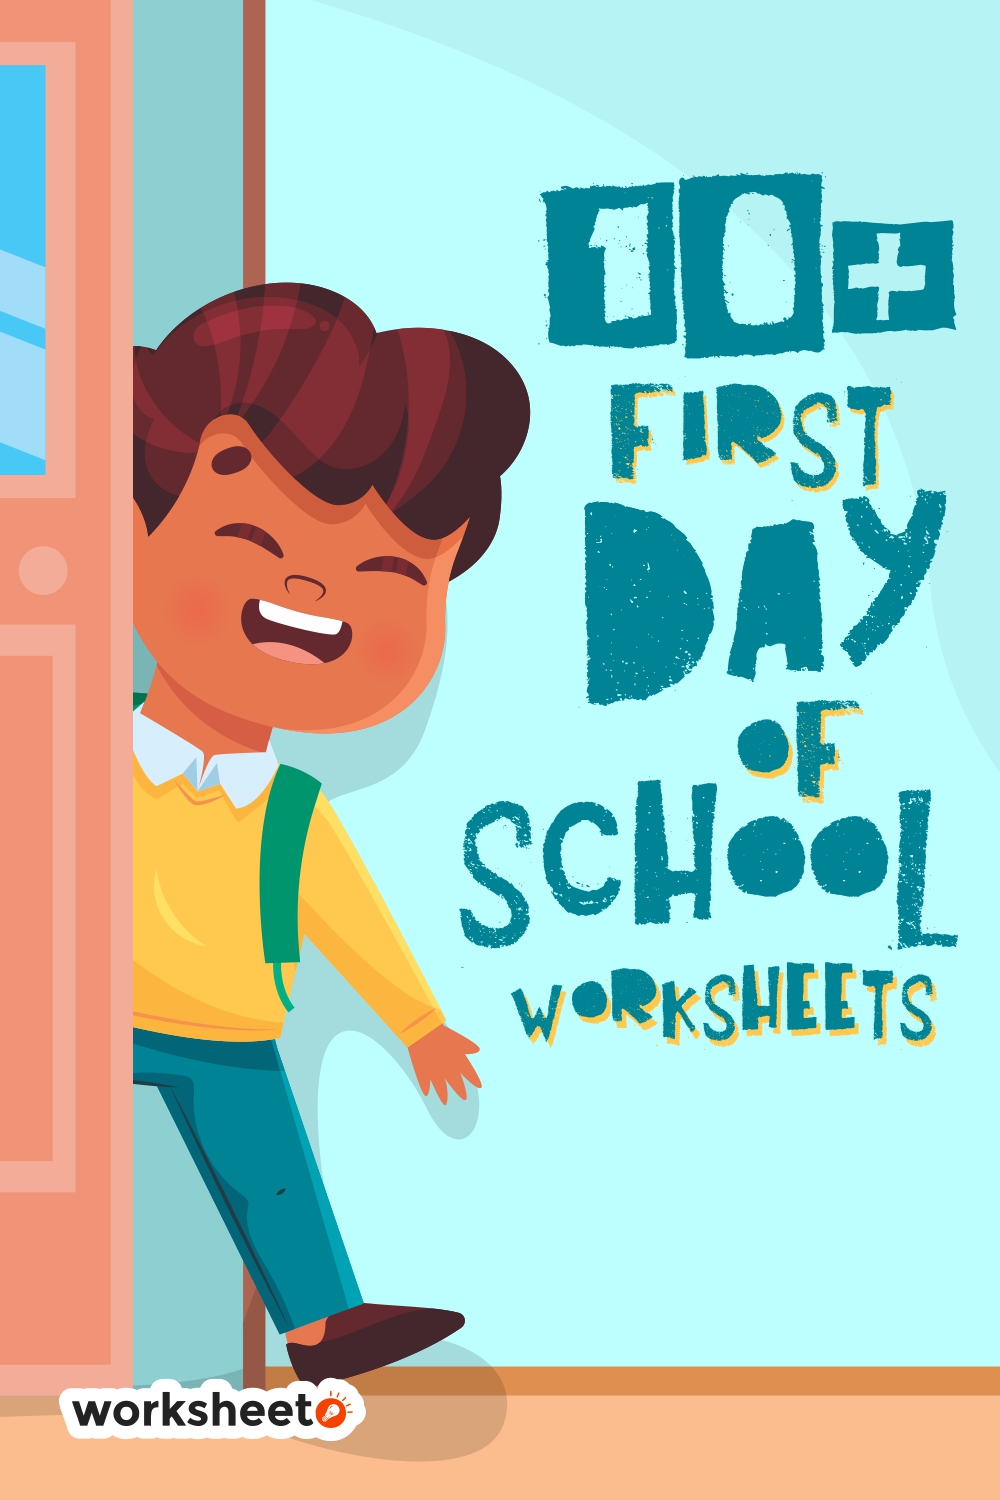 15-first-day-of-school-worksheets-free-pdf-at-worksheeto